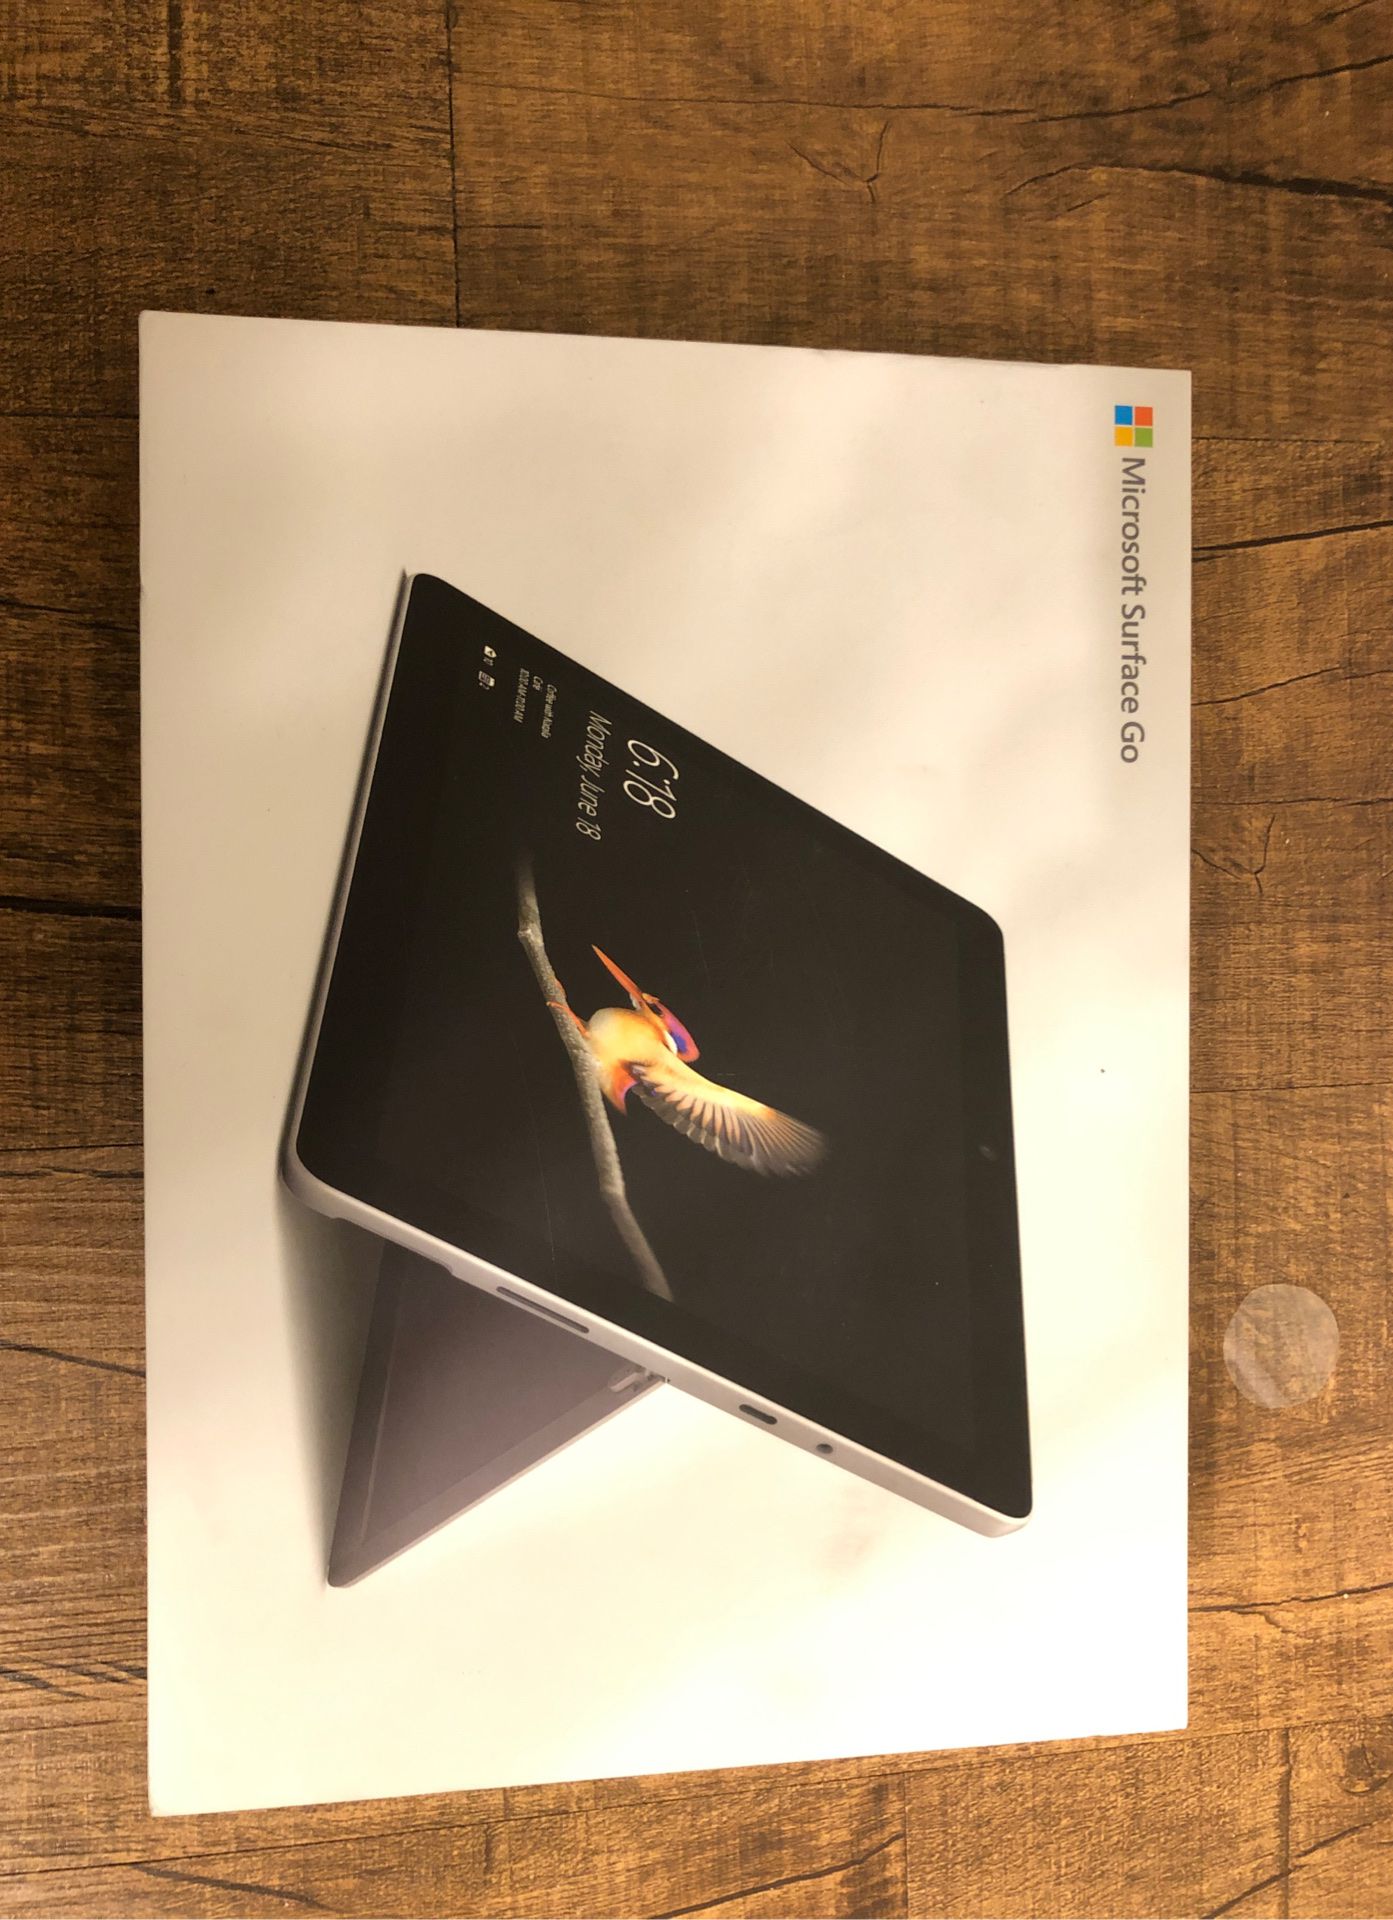 Microsoft surface go with windows 10 also Microsoft surface pen styler unclouded